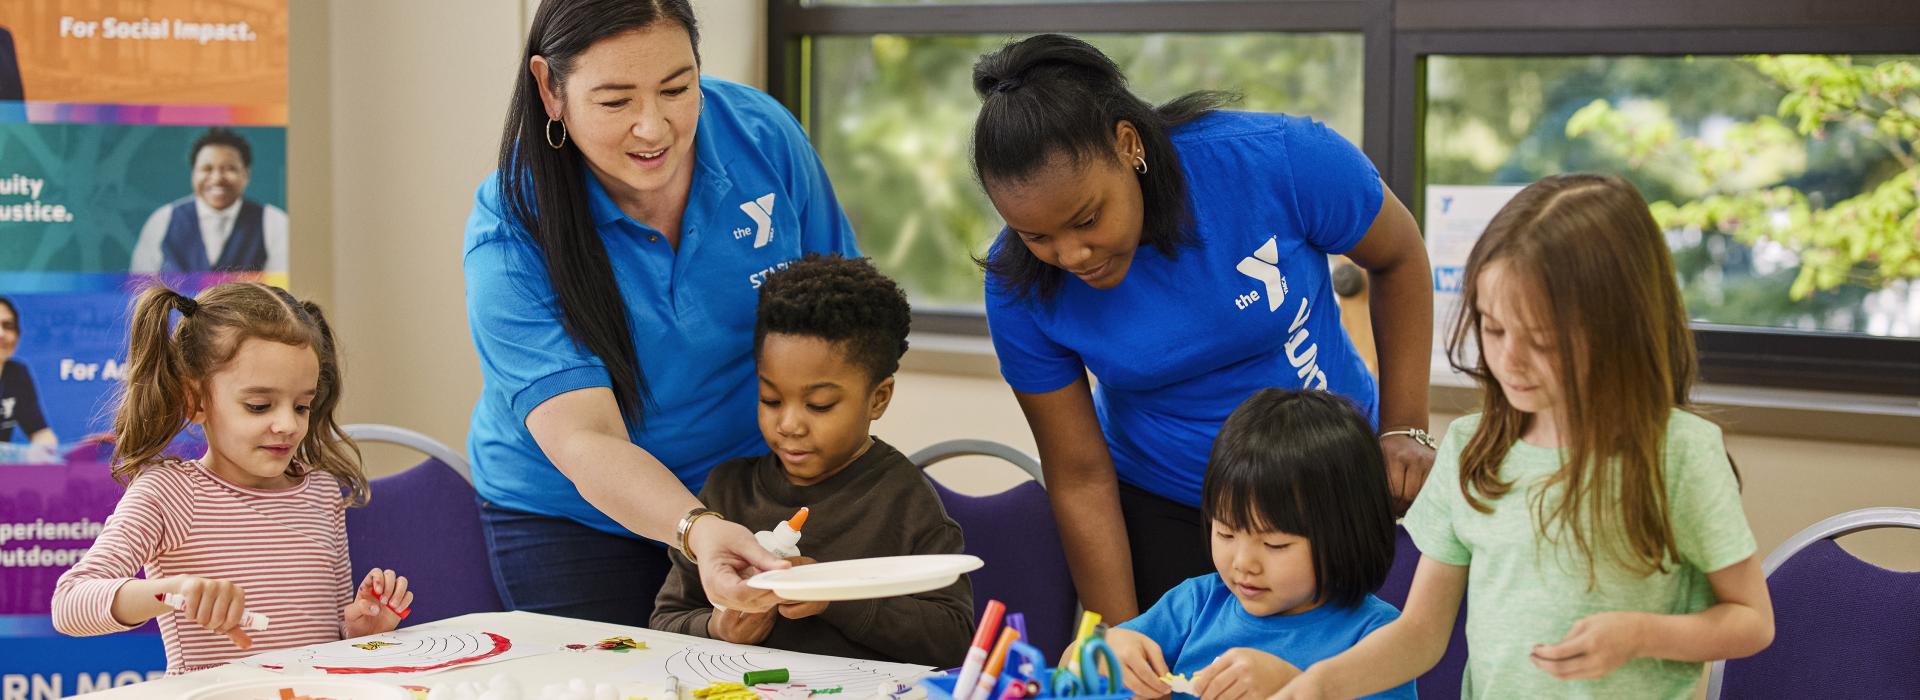 Two YMCA staff members help four children with arts and crafts project in YMCA childcare.